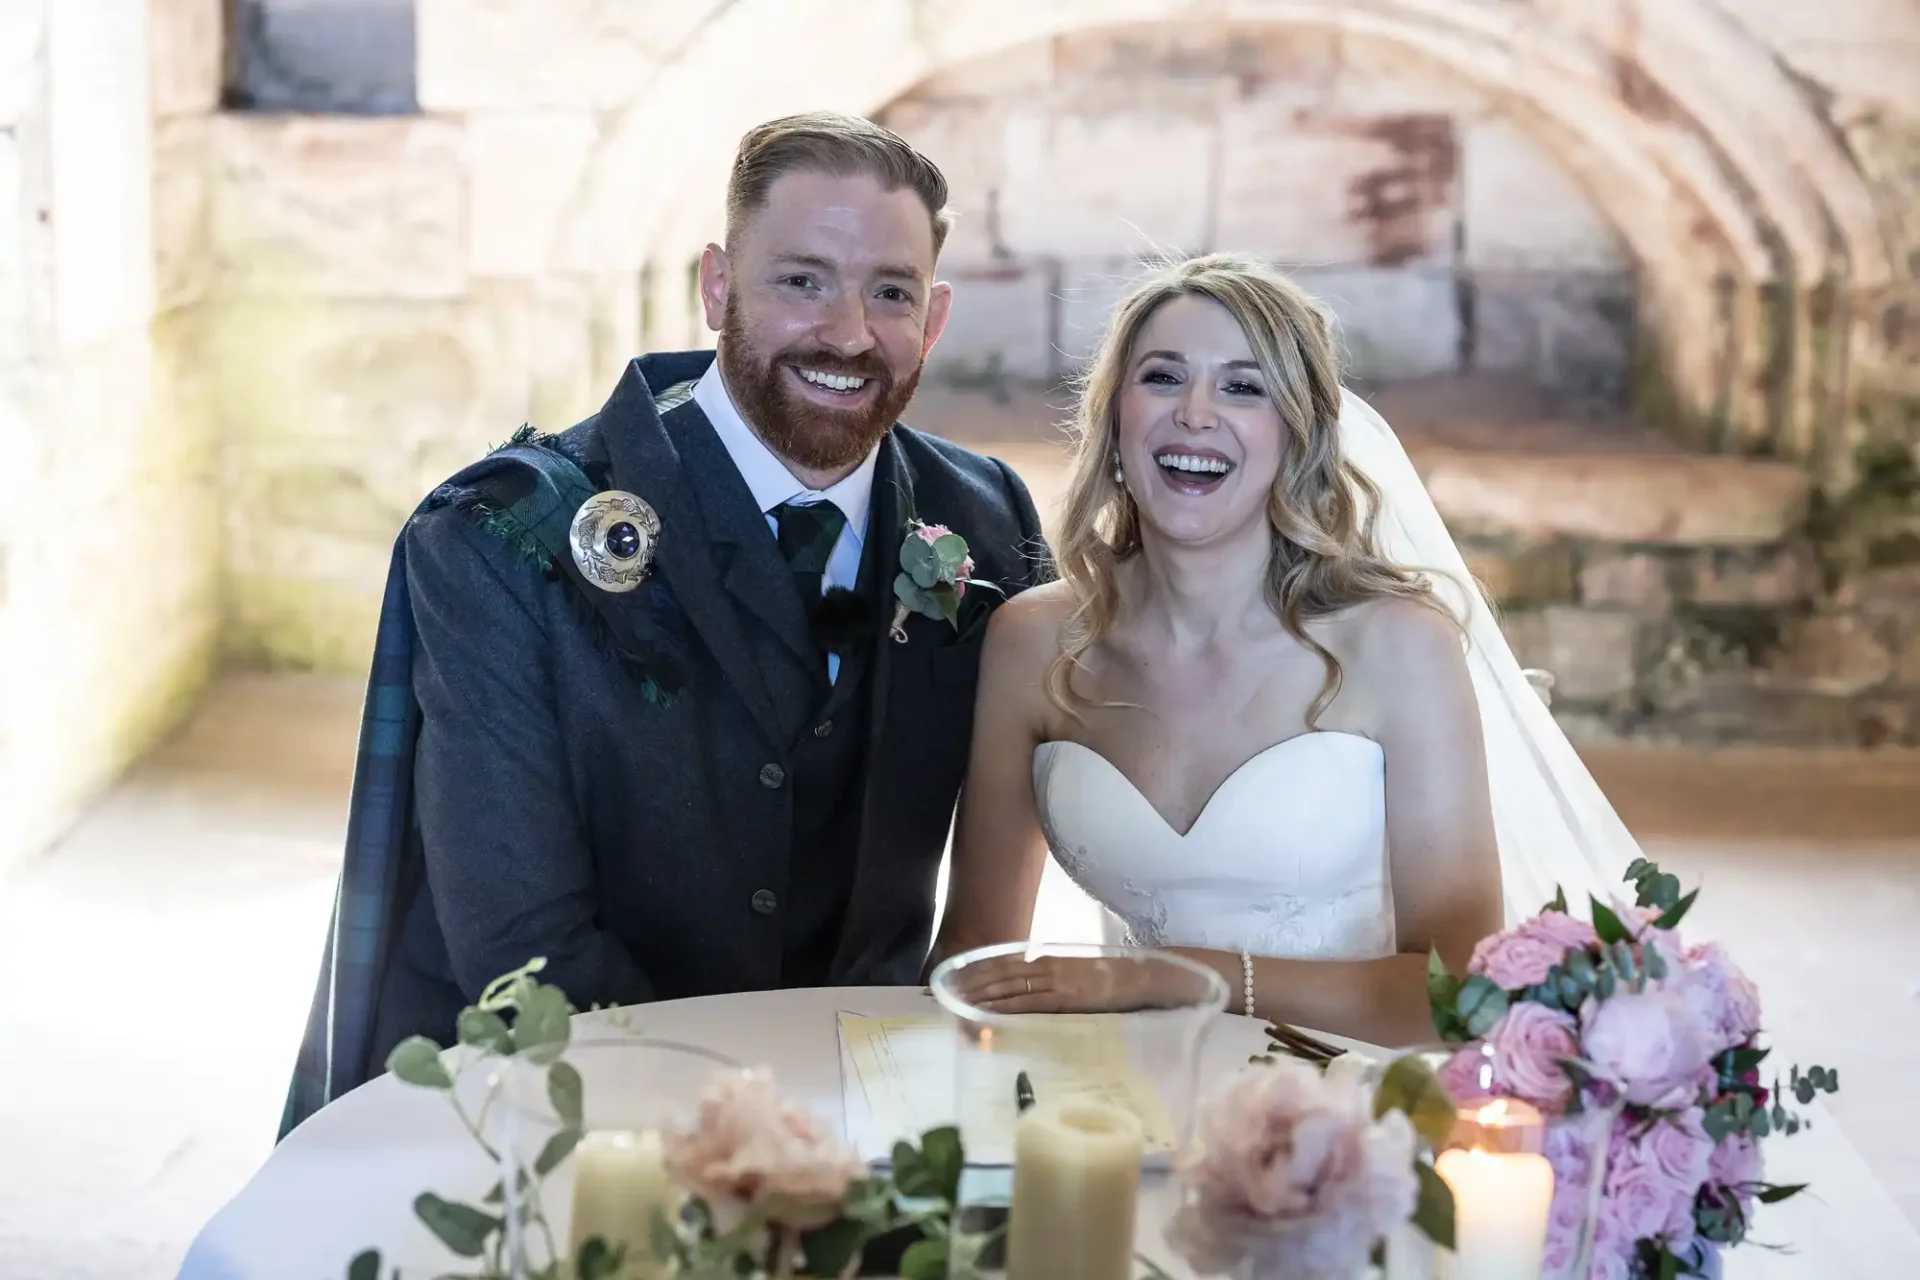 A joyful bride and groom sit at a wedding table, smiling broadly, in an elegant historic venue with stone arches in the background.